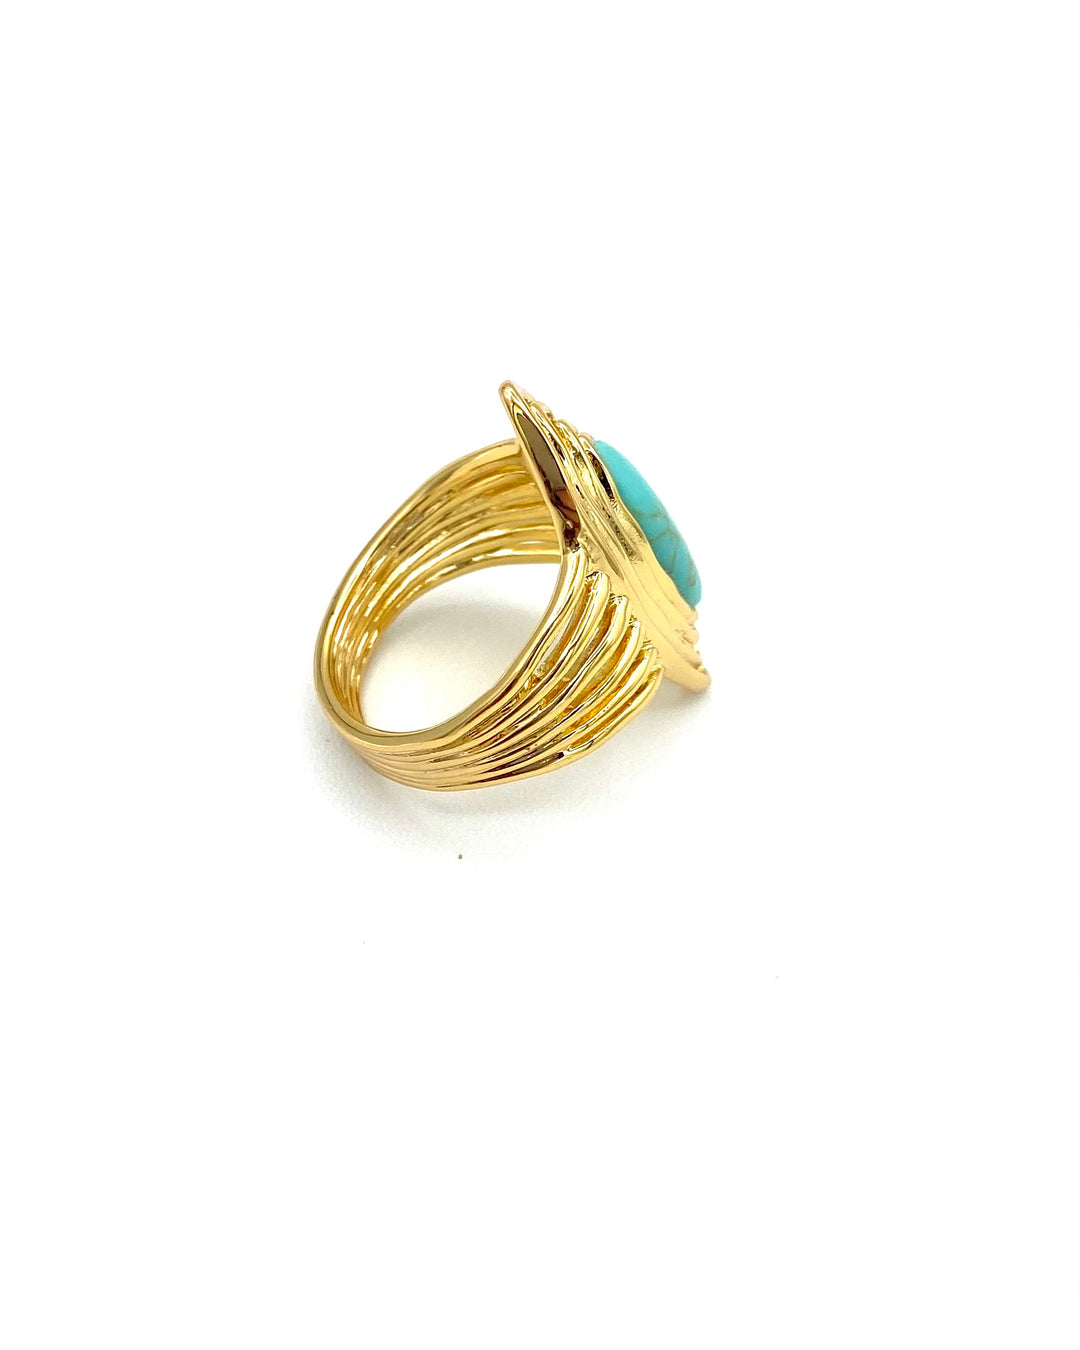 Gold and Turquoise Statement Ring - Size 7